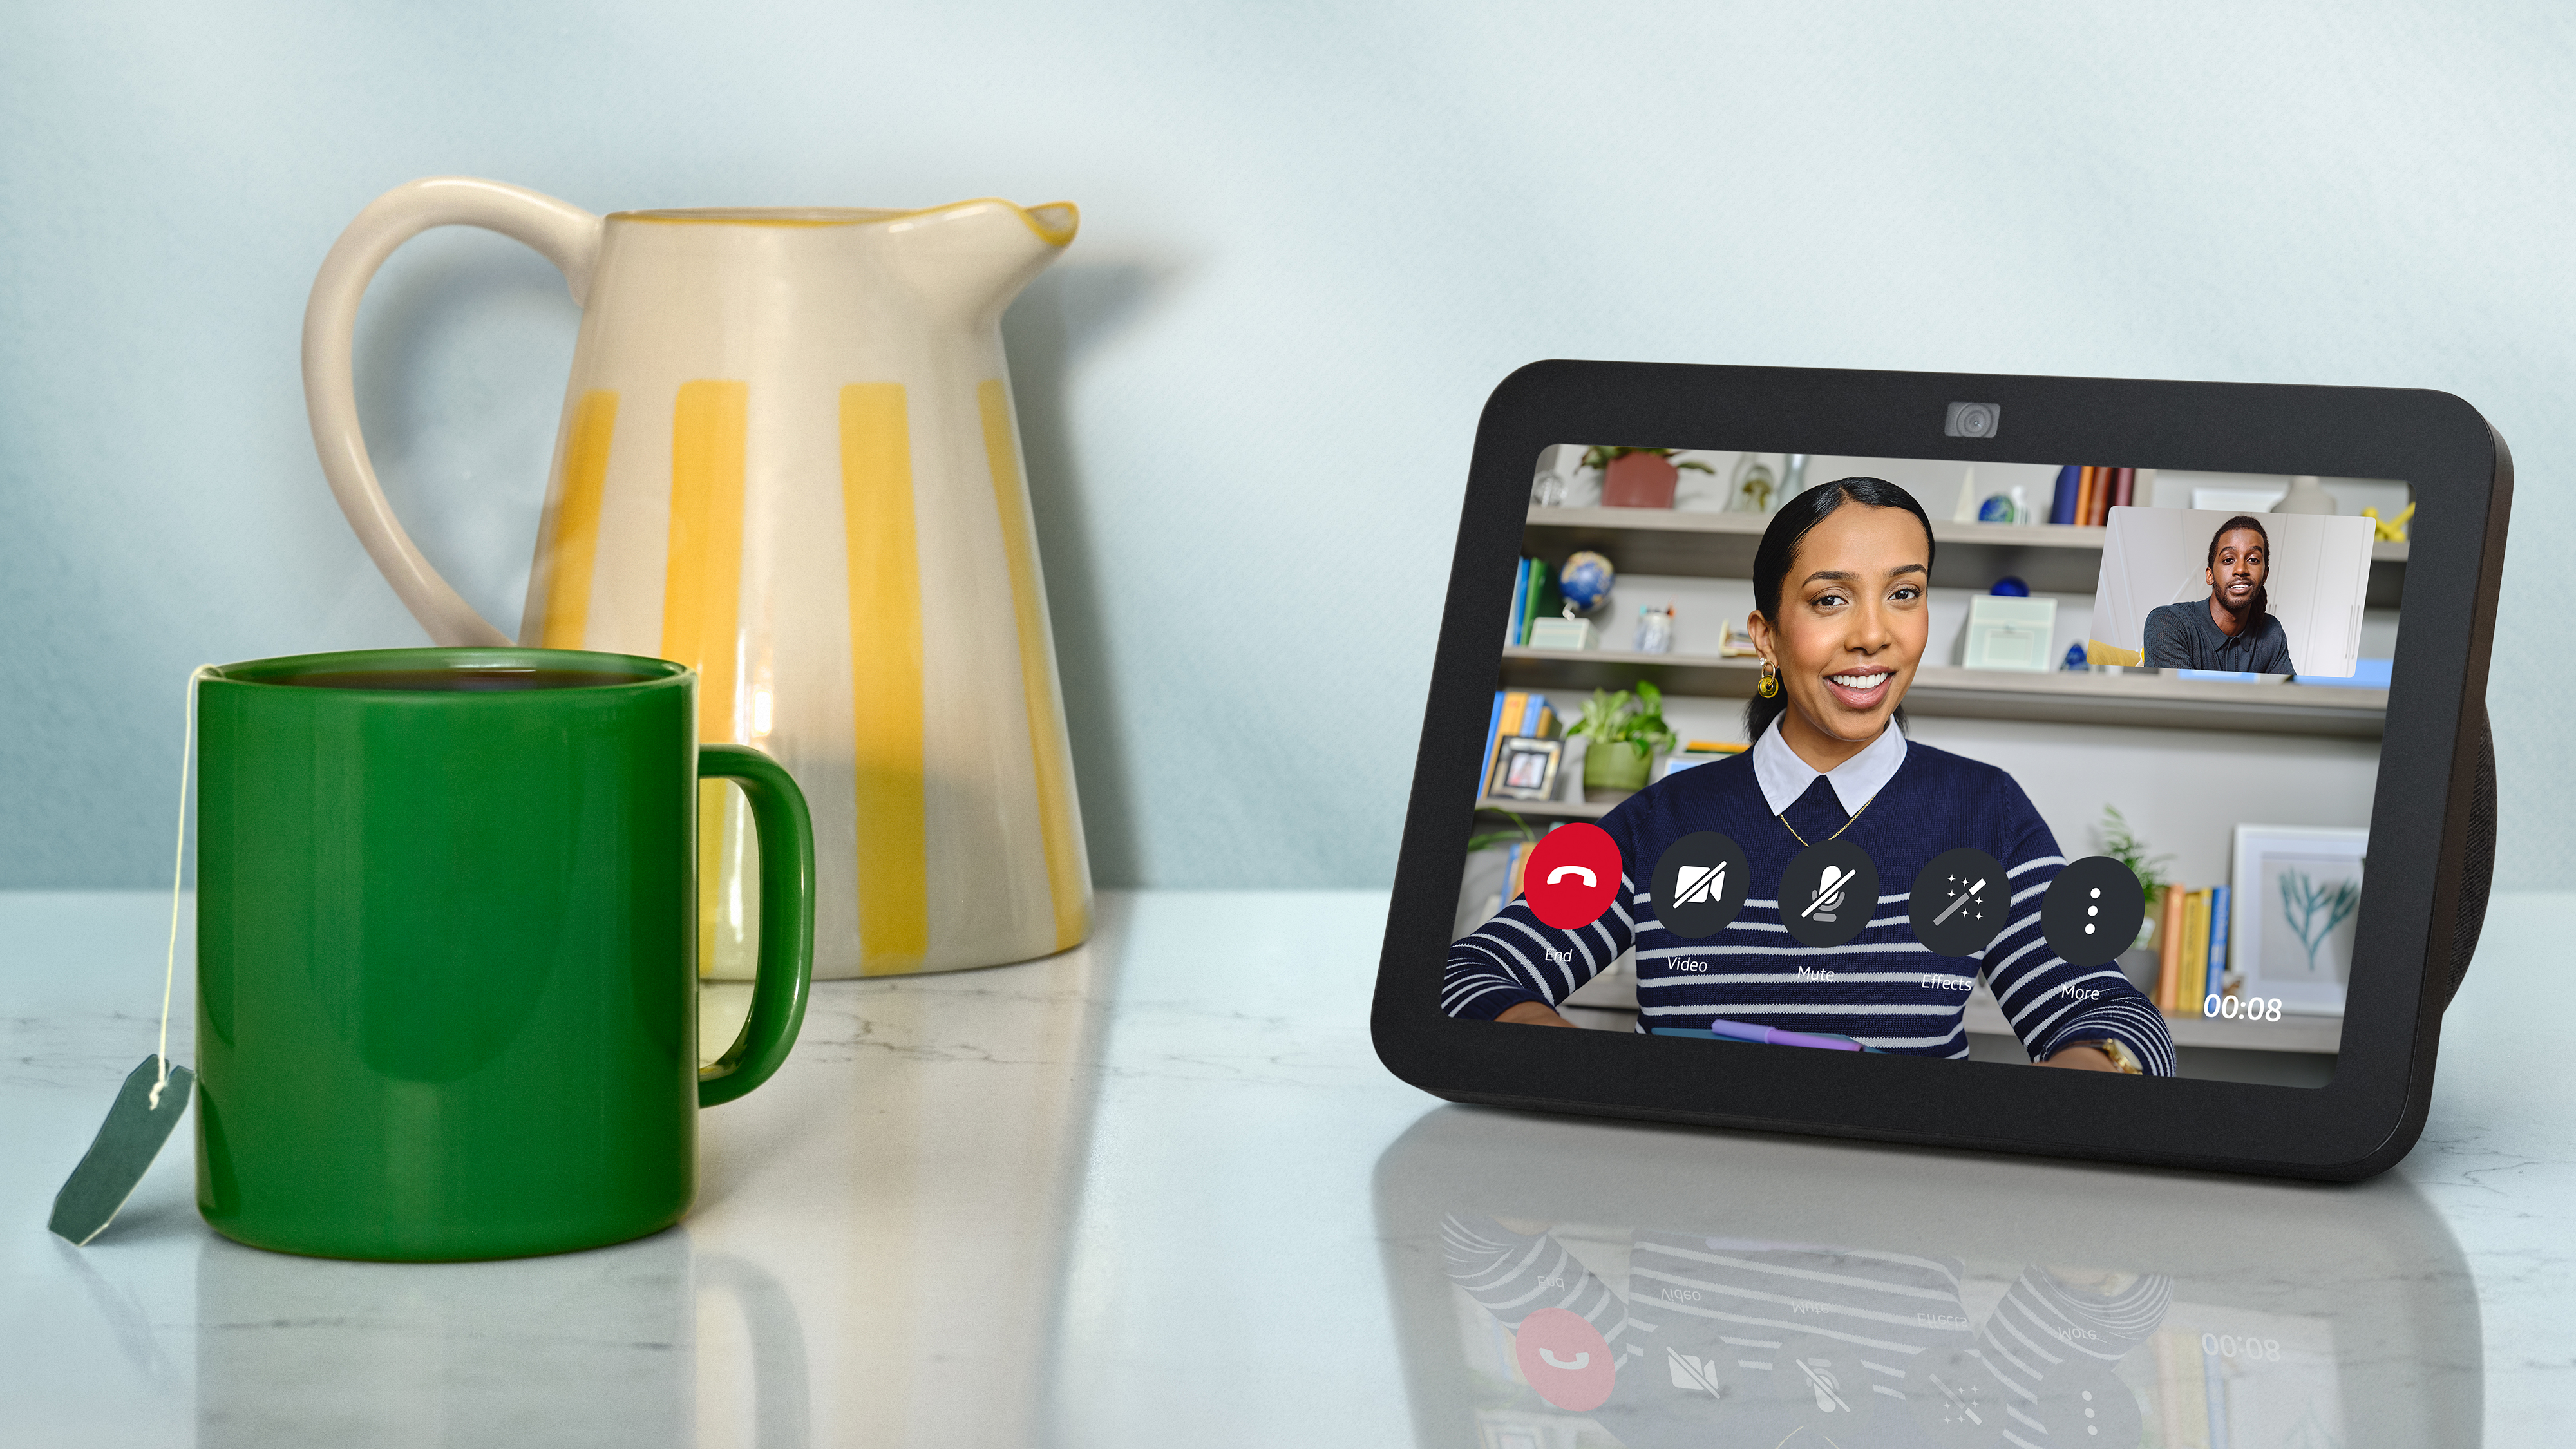 The Amazon Echo Show 8 on a table next to two jugs